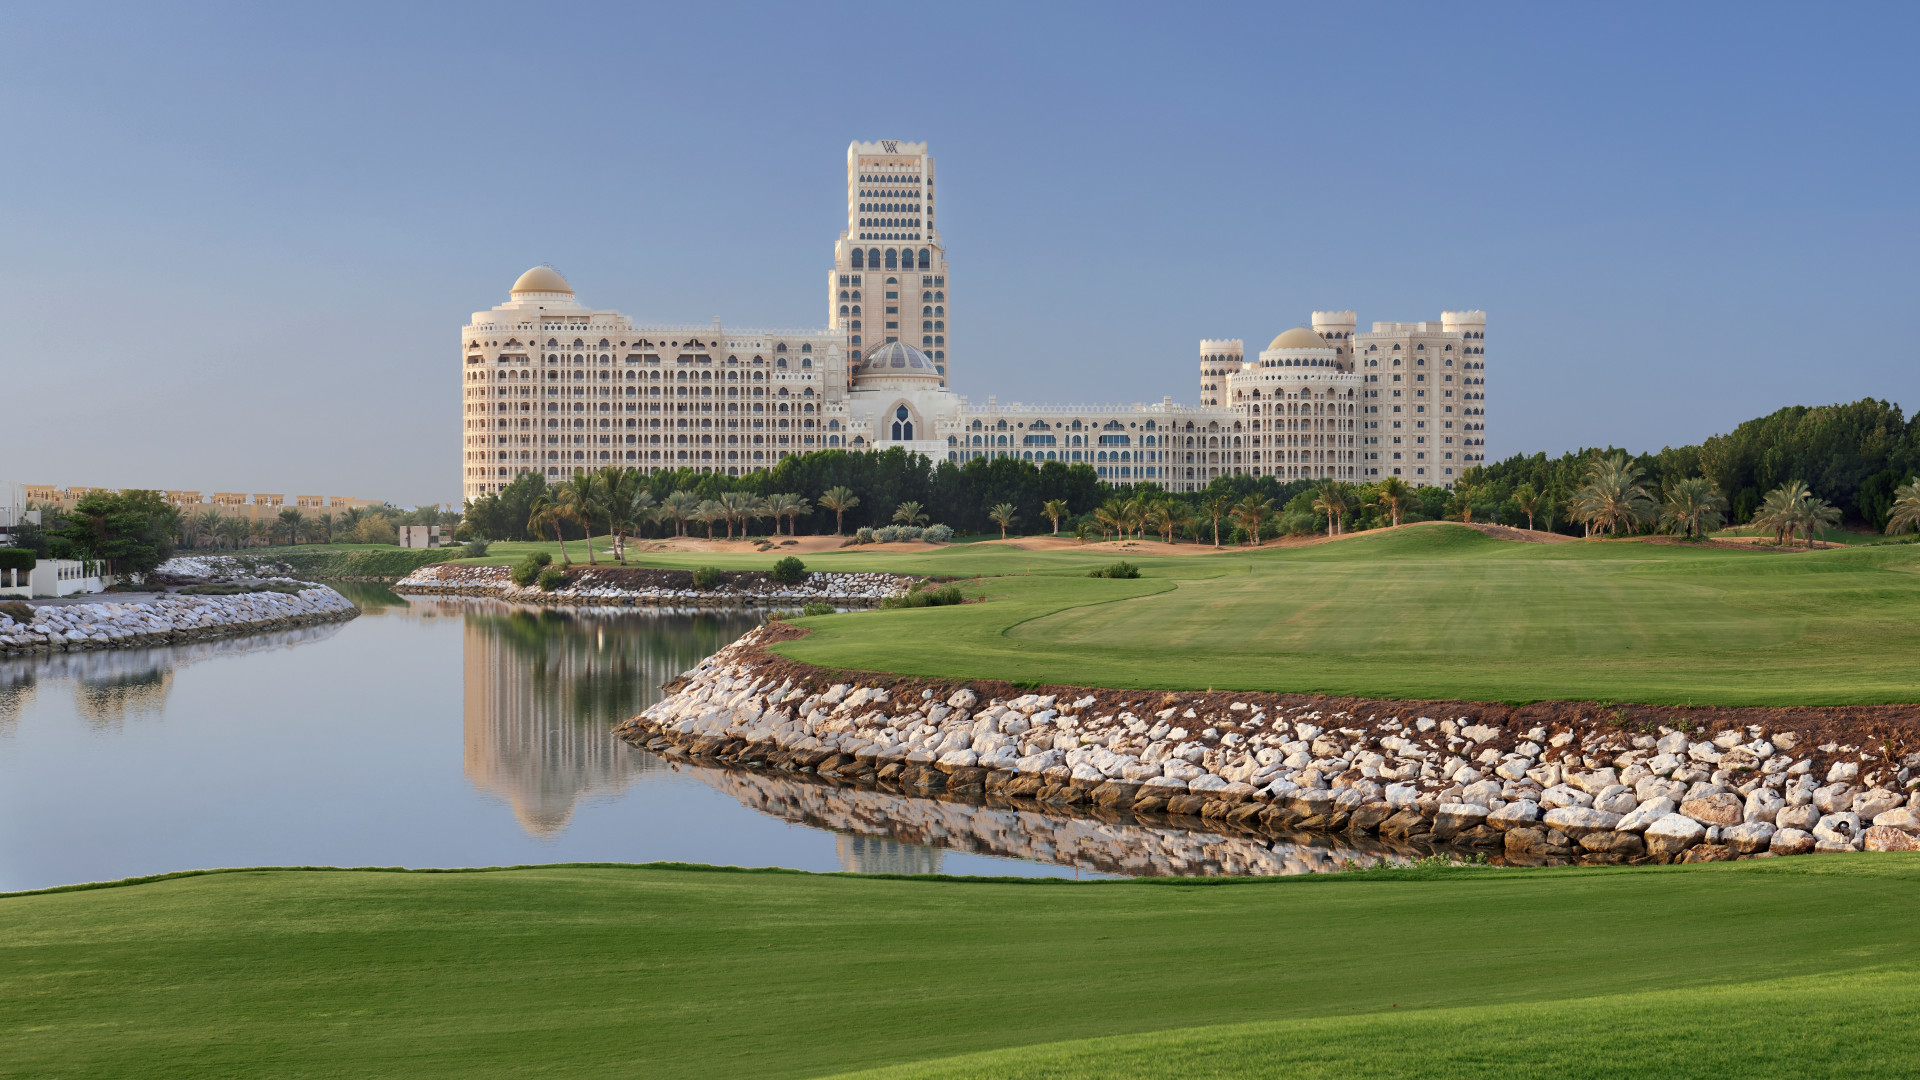 View of the hotel from the Golf Course